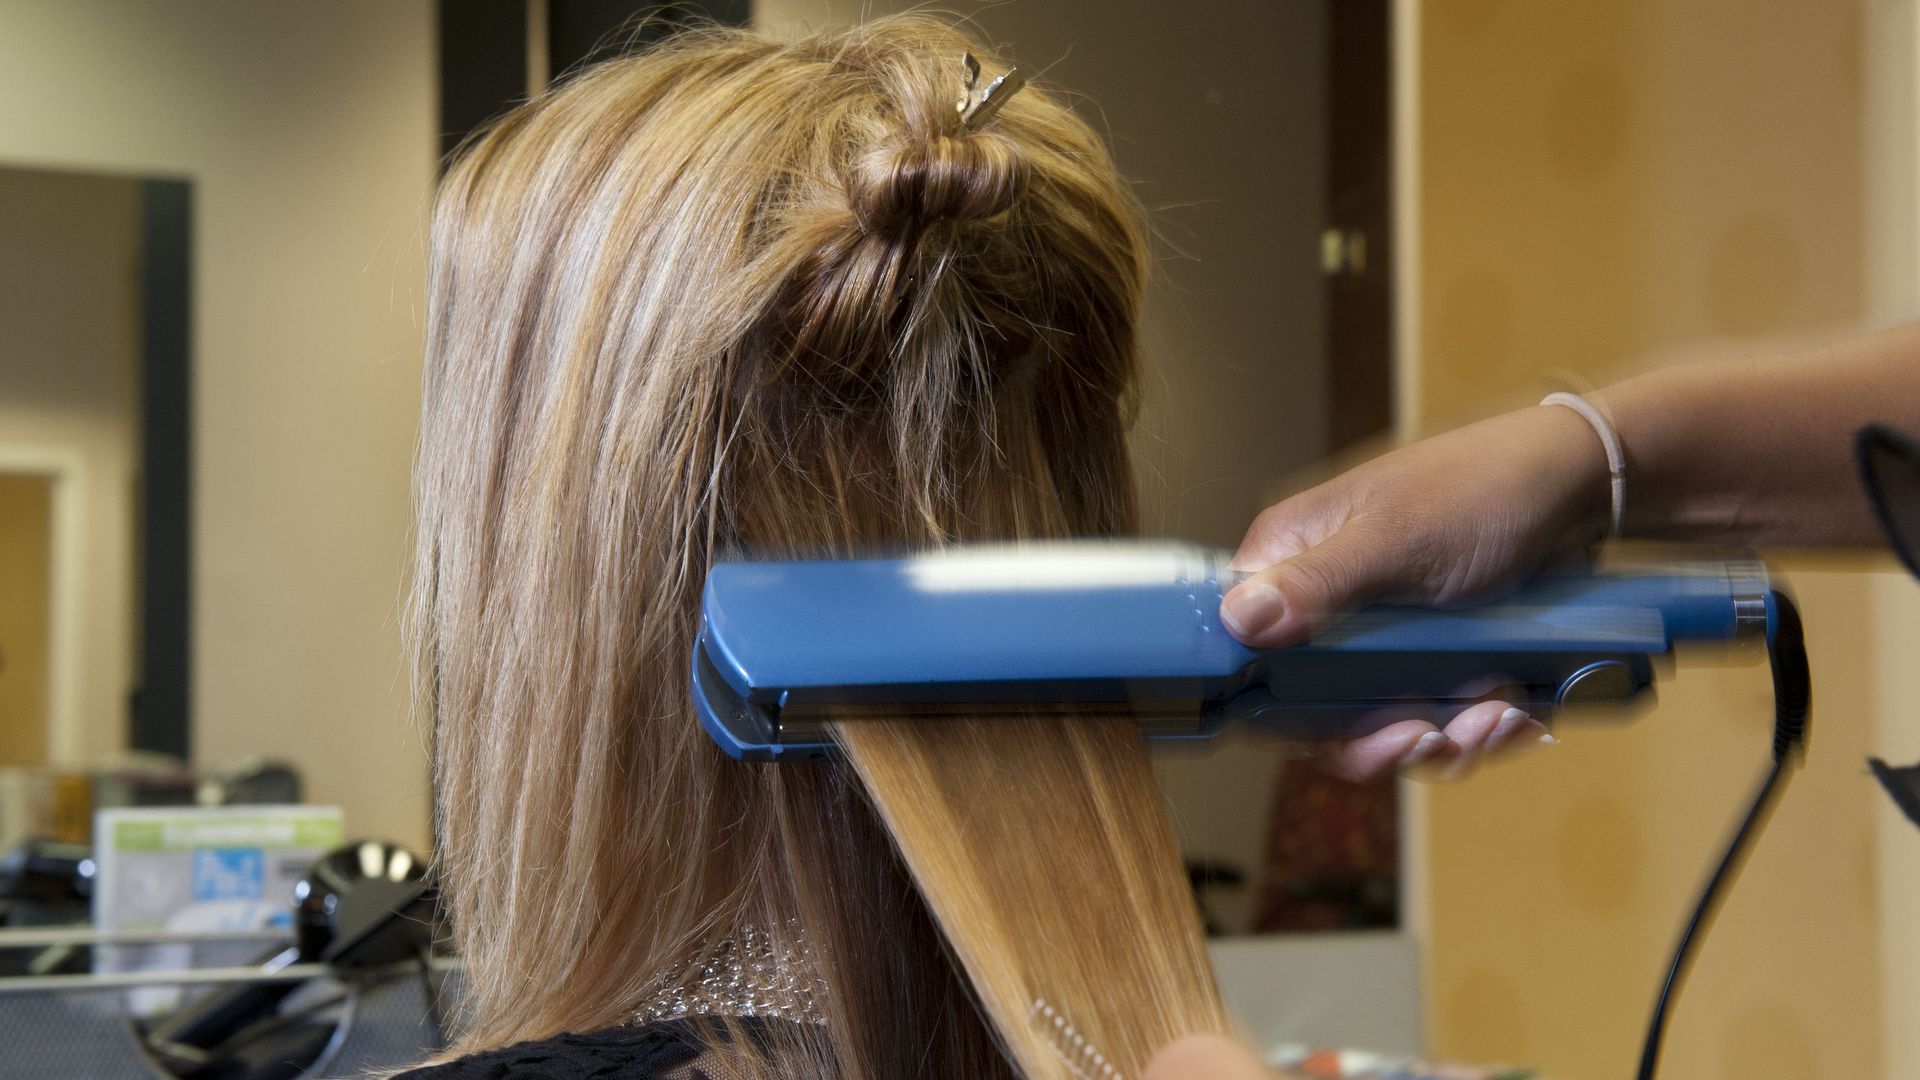 A woman gets her hair straightened at a salon.